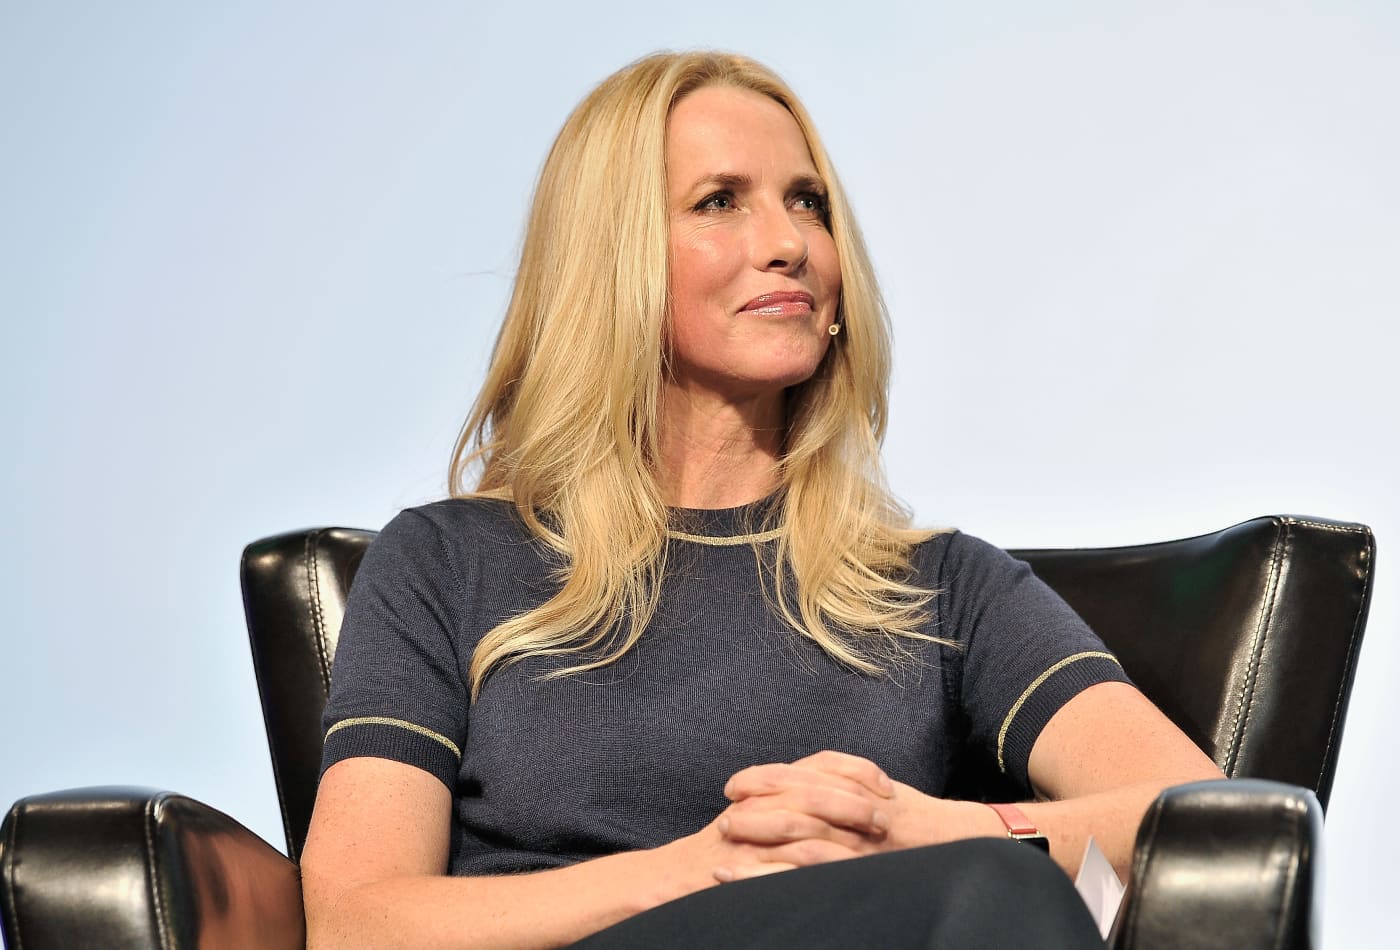 Laurene Powell Jobs speaks onstage during TechCrunch Disrupt SF 2017. (Photo by Steve Jennings/Getty Images for TechCrunch)